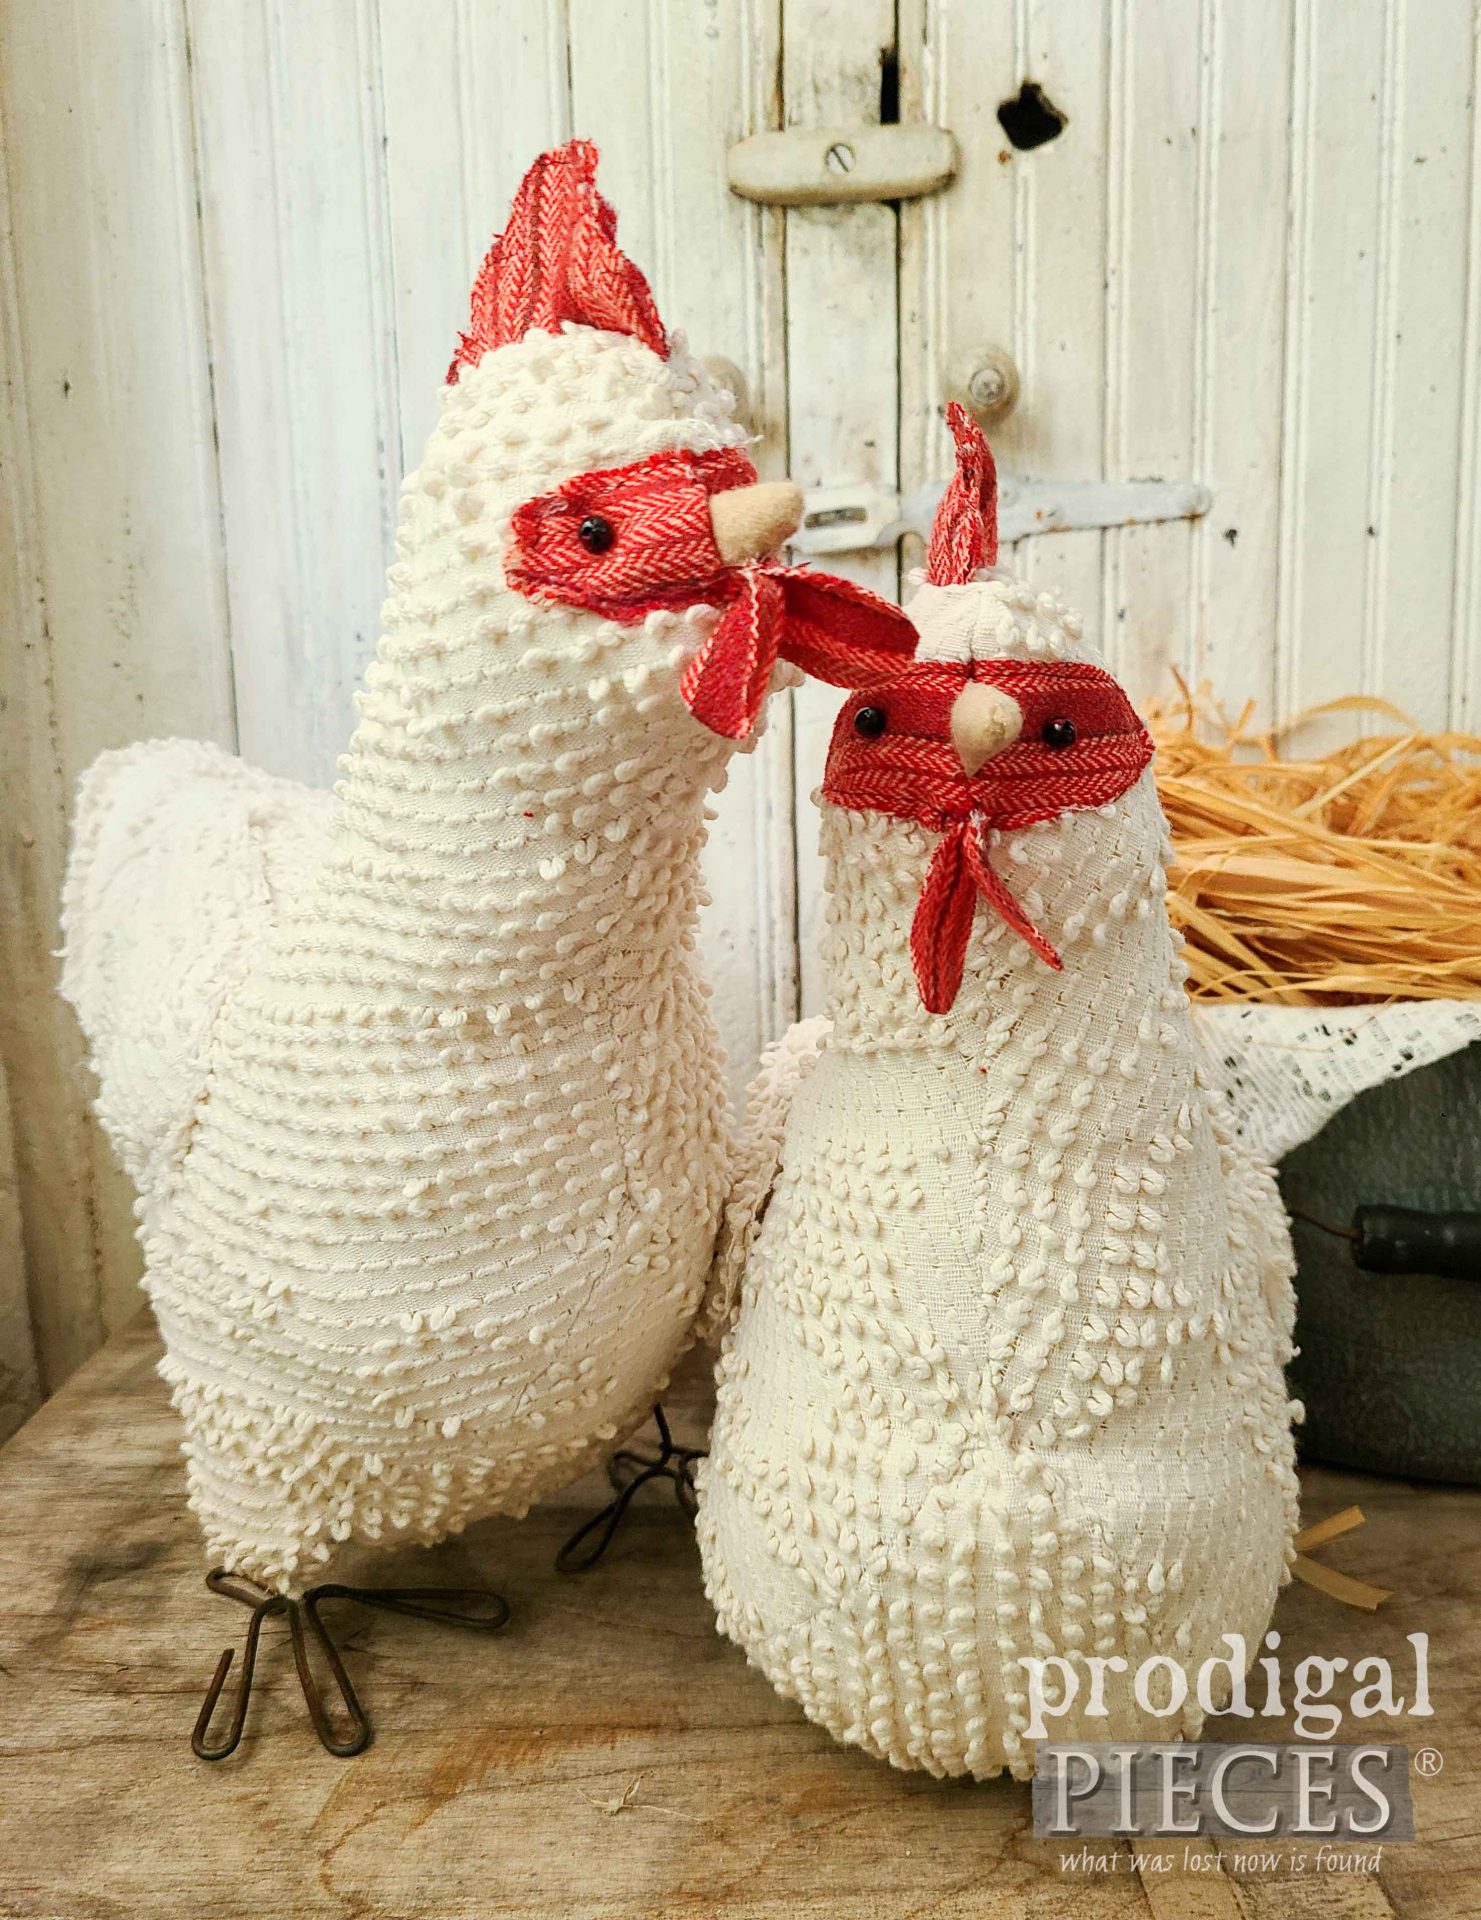 Sweet Chenille Chicken Sisters made by Larissa of Prodigal Pieces from an upcycled bedspread | prodigalpieces.com #prodigalpieces #handmade